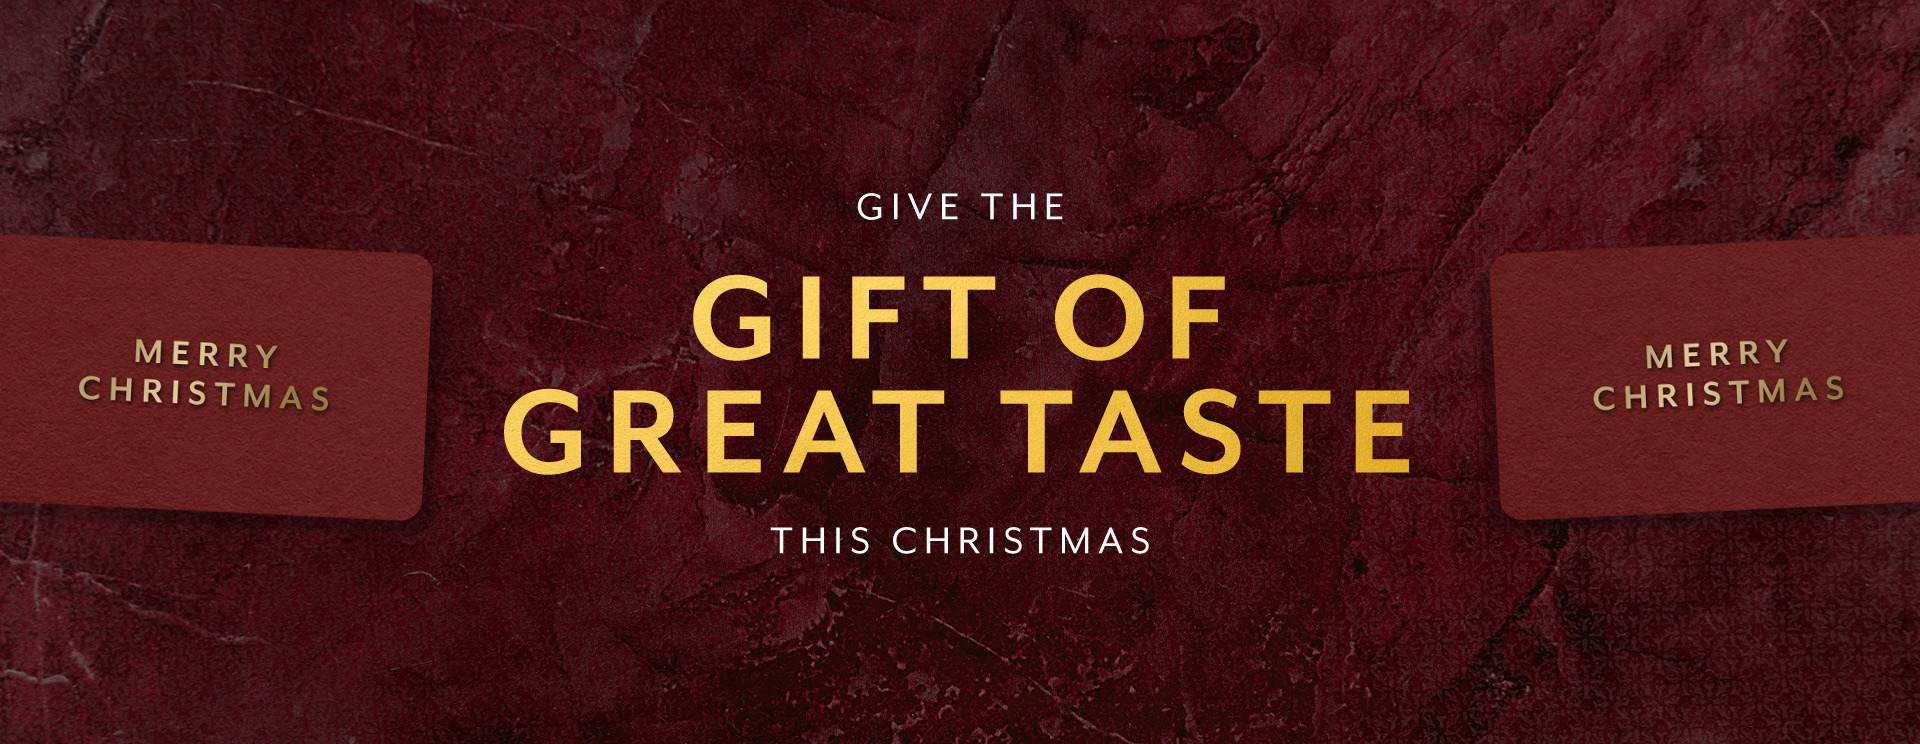 Give the gift of a gift card at The Lyttelton Arms